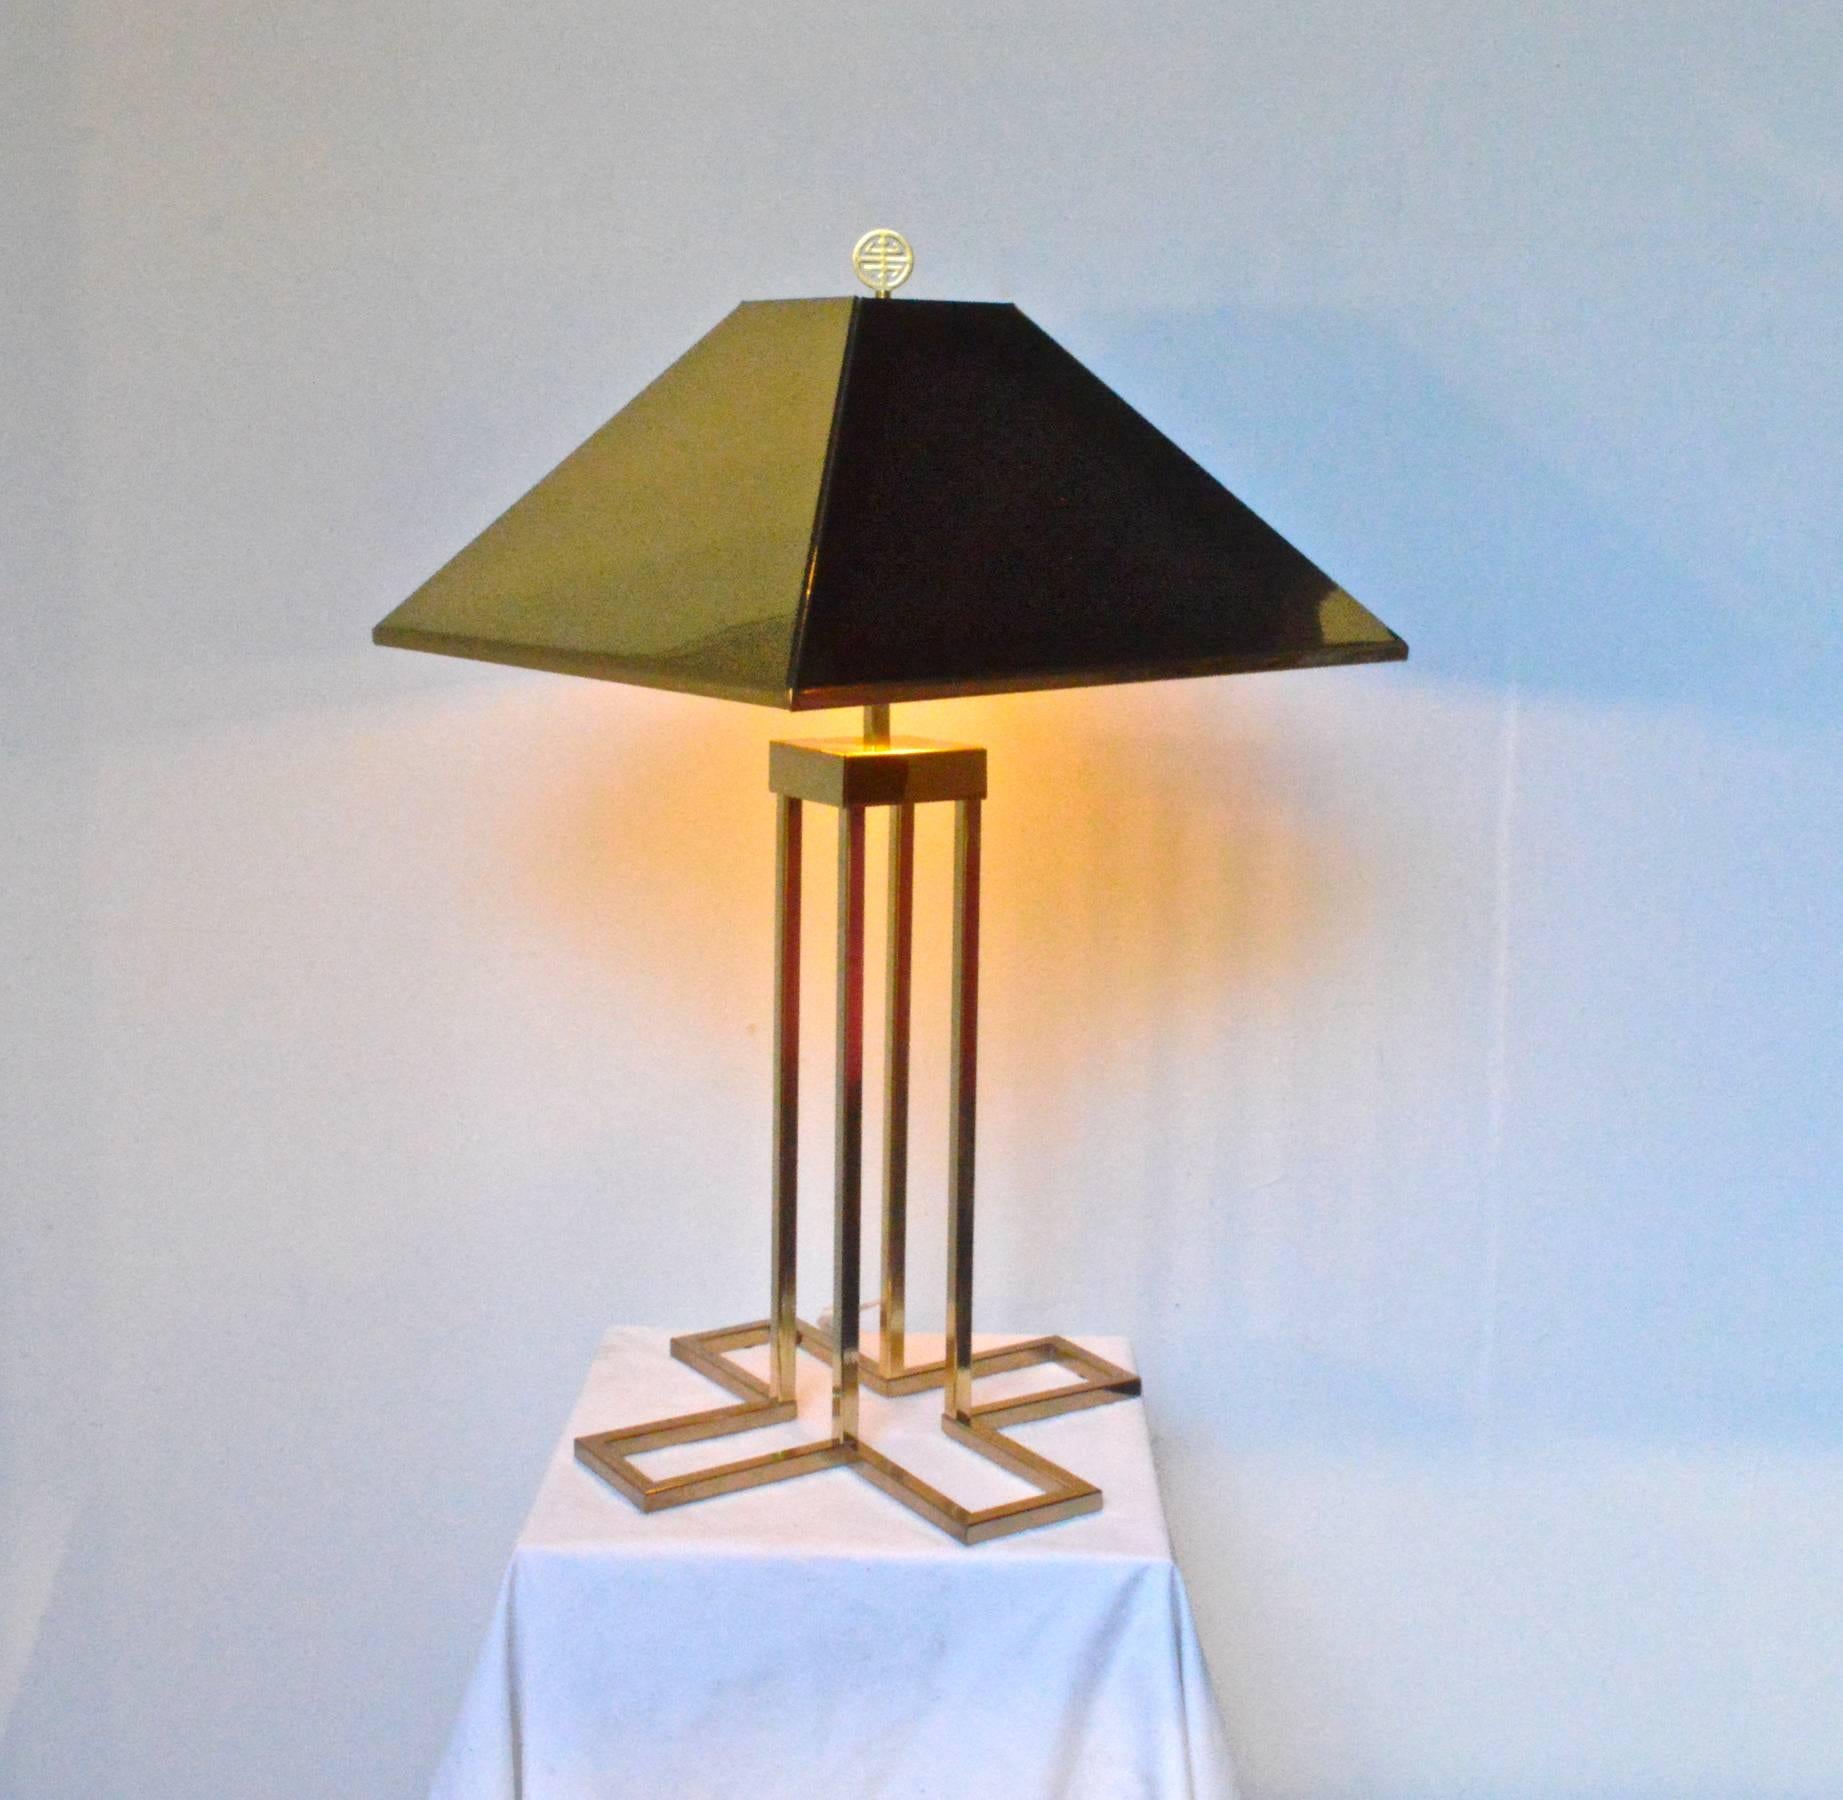 Chic brass table lamp by C. Jere. Signed and dated 1977. Sells and ships with the original brass shade of pyramid form. 

Global shipping available. 
Please contact us with any questions or request, we would be very happy to assist you. 

